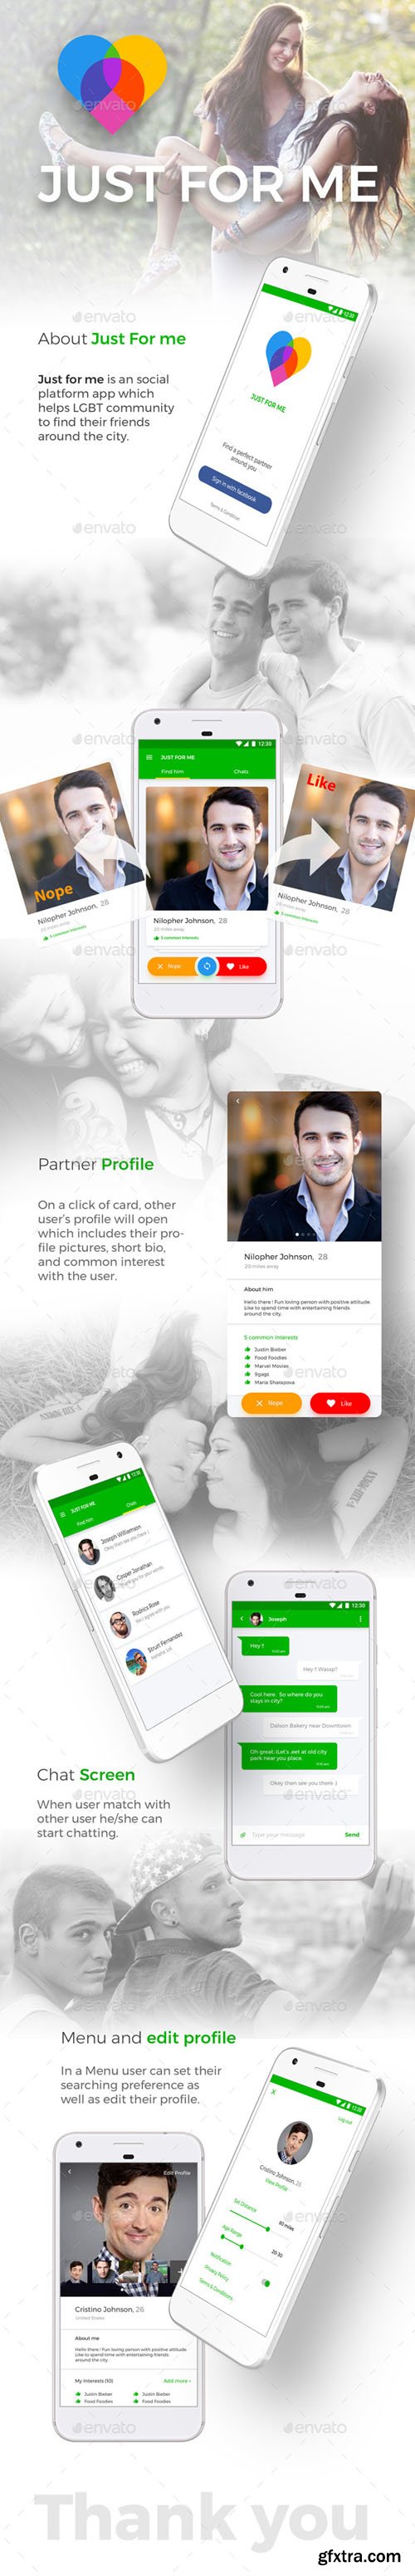 GR - Dating App UI Kit like Tinder | Just For Me for Android + iOS 20712407